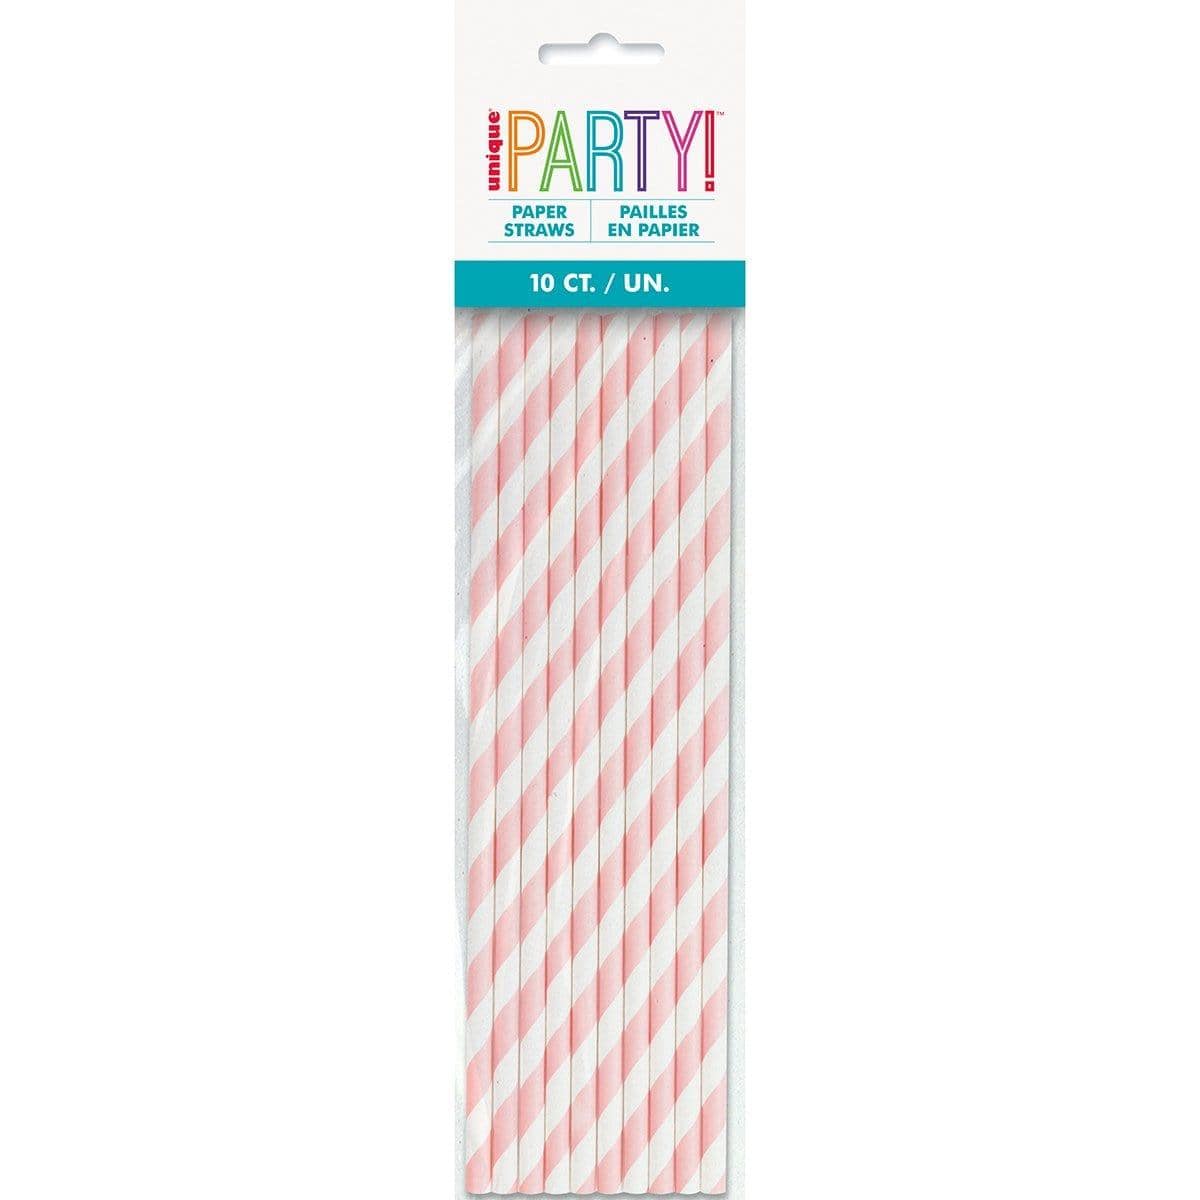 Buy Plasticware Paper Straw With Stripes 10/pkg - Light Pink sold at Party Expert